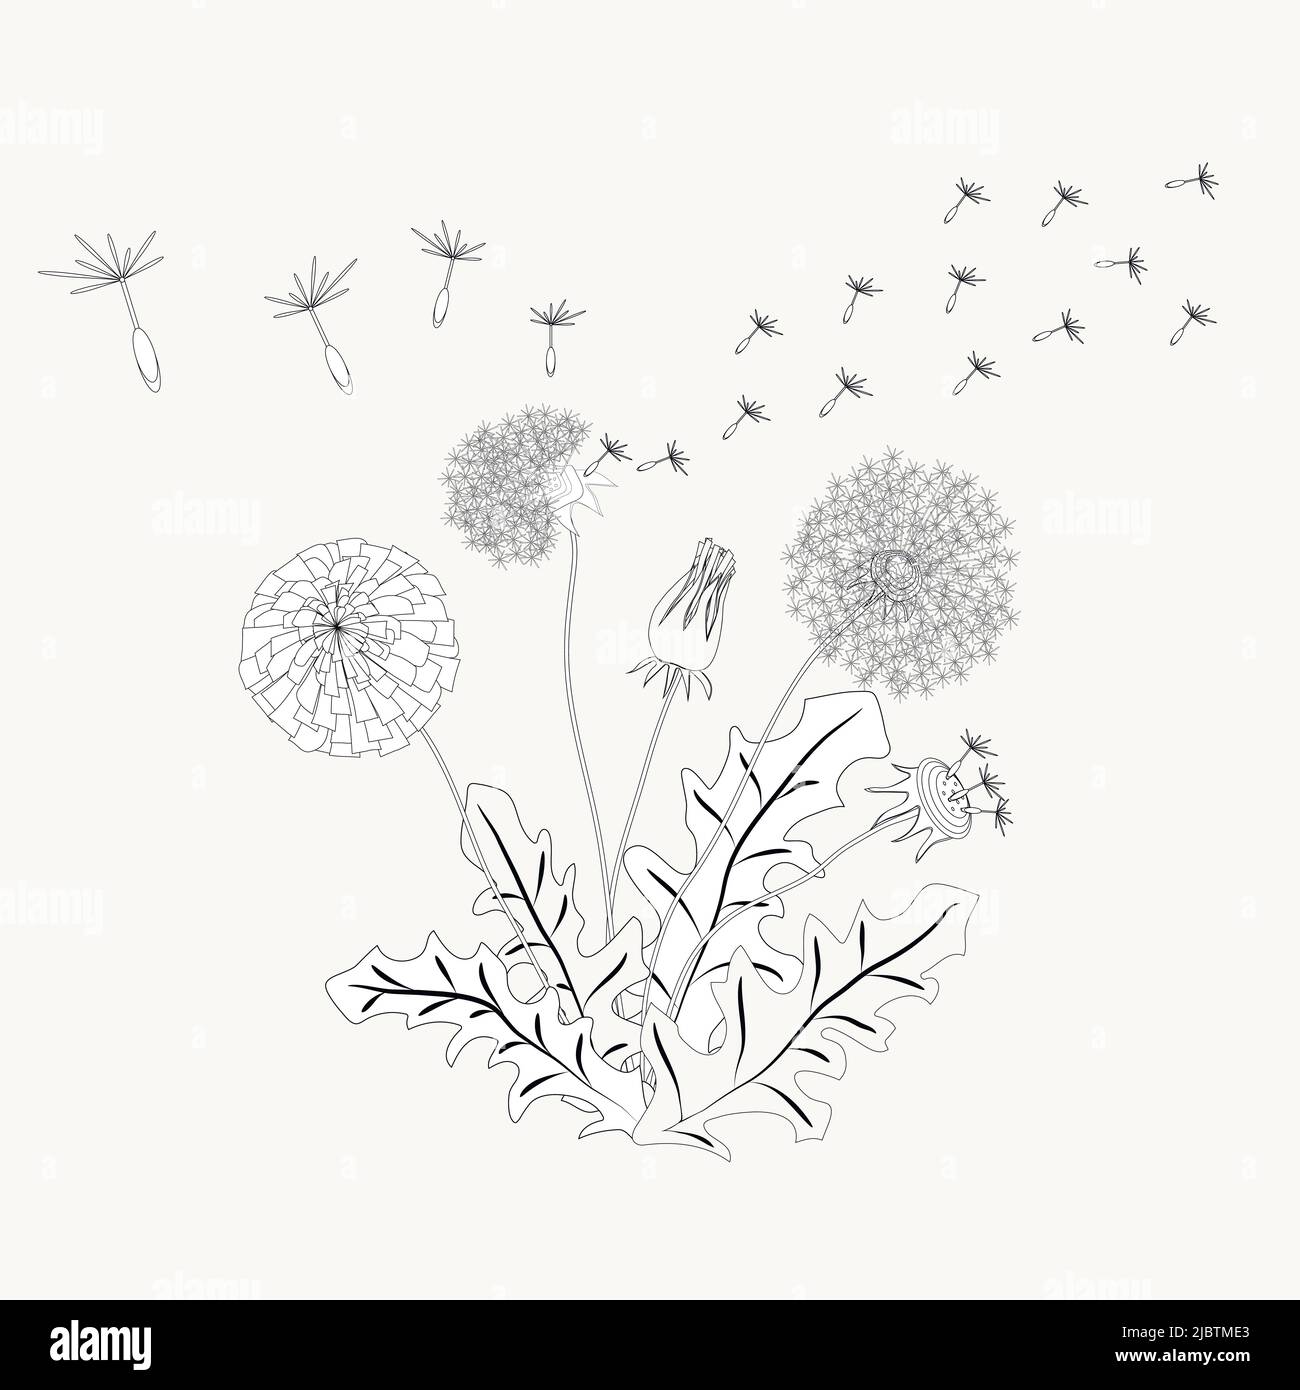 Dandelion contour vector illustration made in the artistic style for textiles, coloring book, decorations, herbal tea, medical. Stock Vector